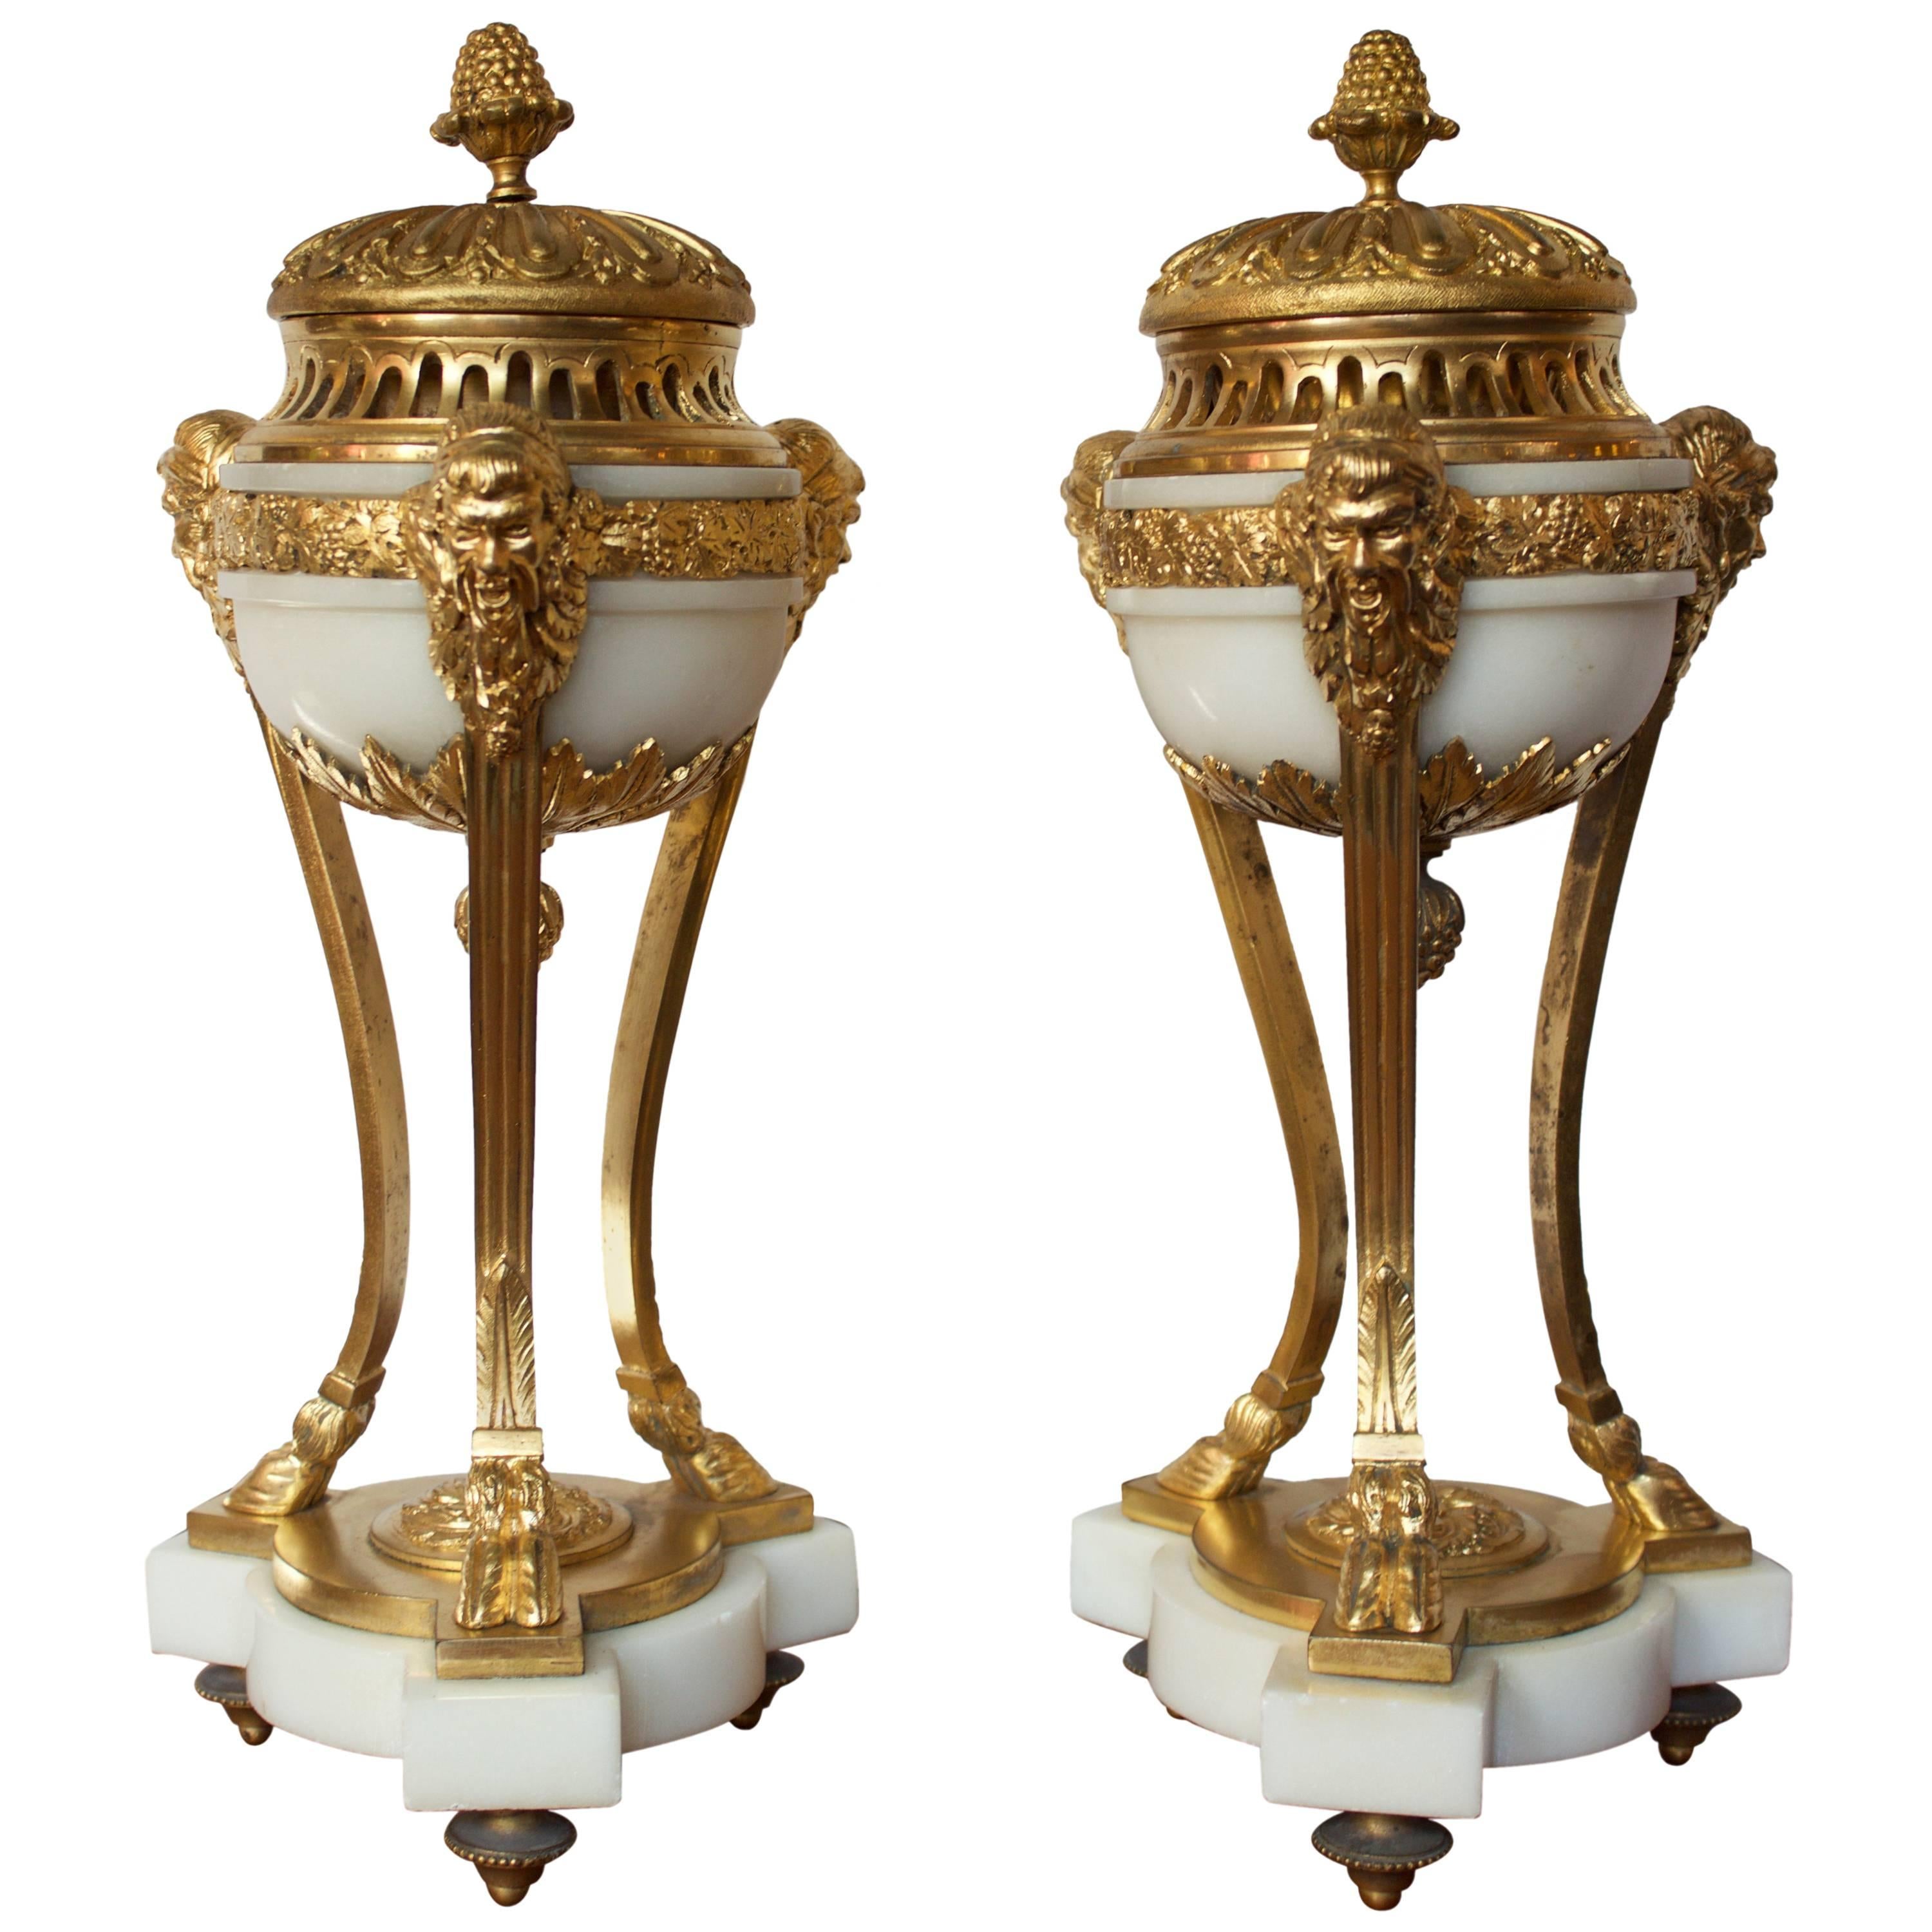 Pair of Early 19th Century French Incense Burners Louis XVI Style For Sale